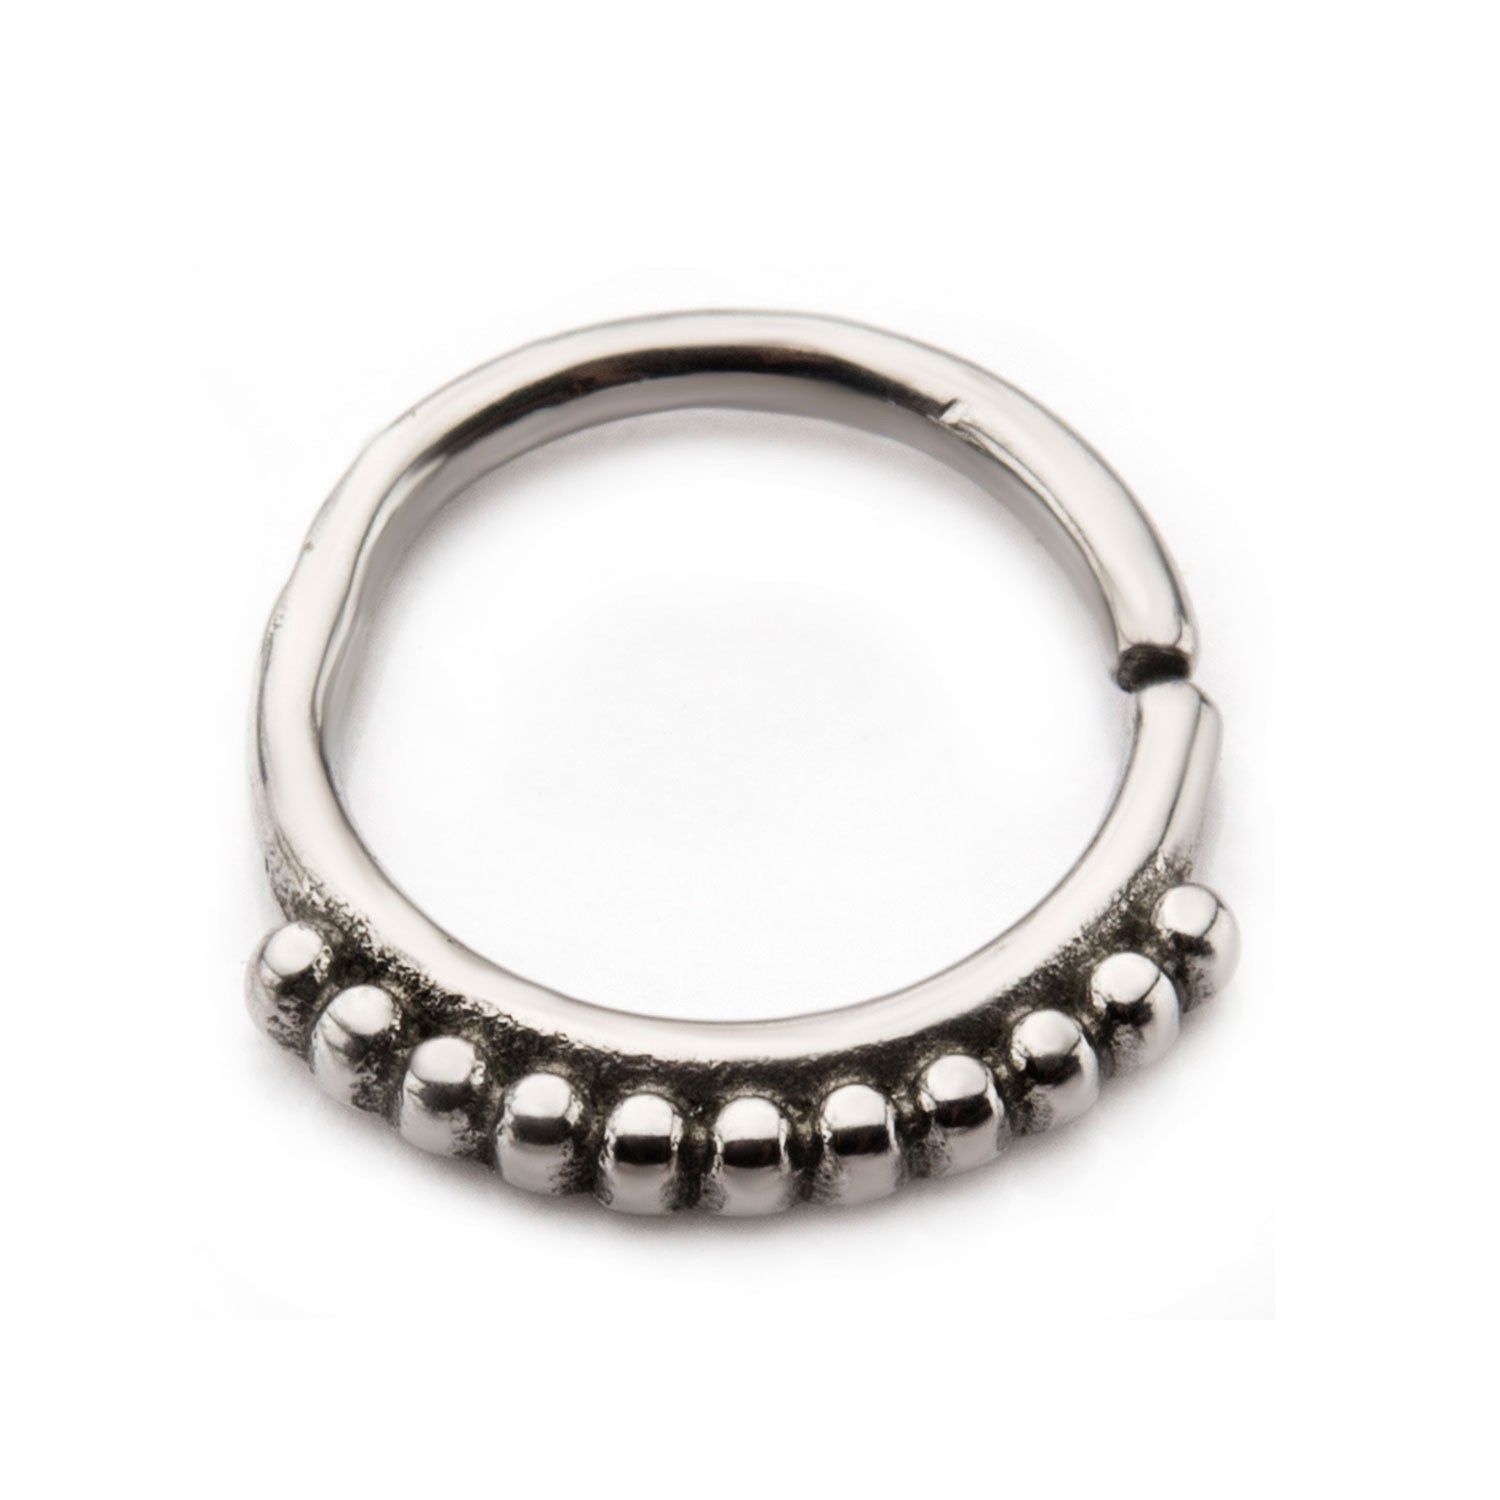 Stainless Shotball Continuous Ring Continuous Rings 16g - 11/32